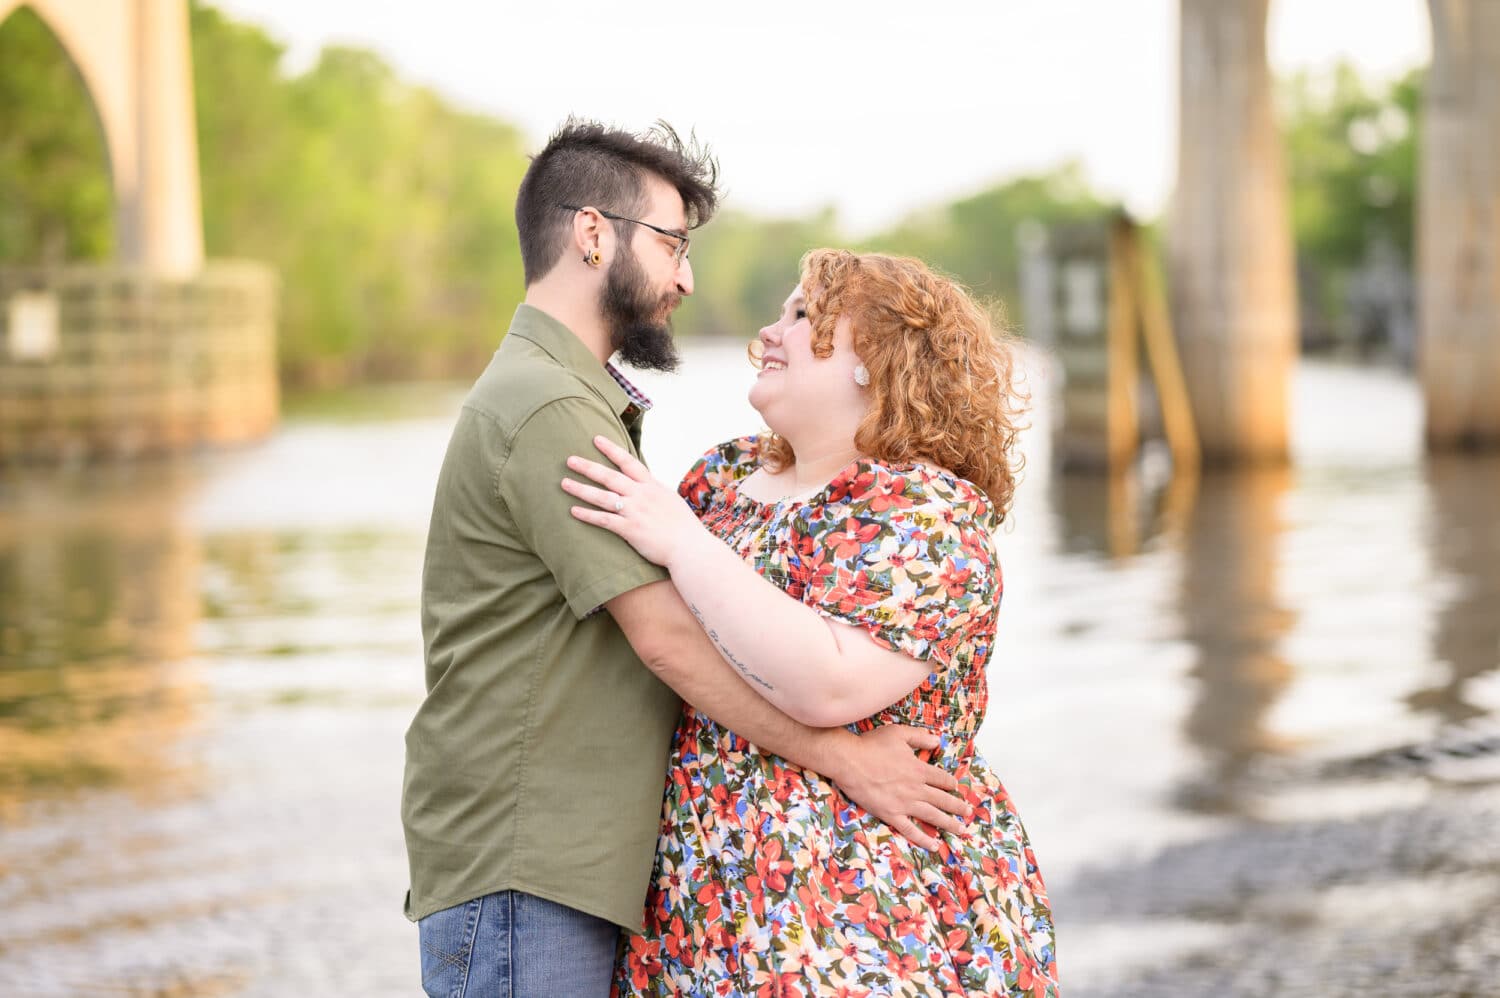 Looking into each other's eyes by the river -